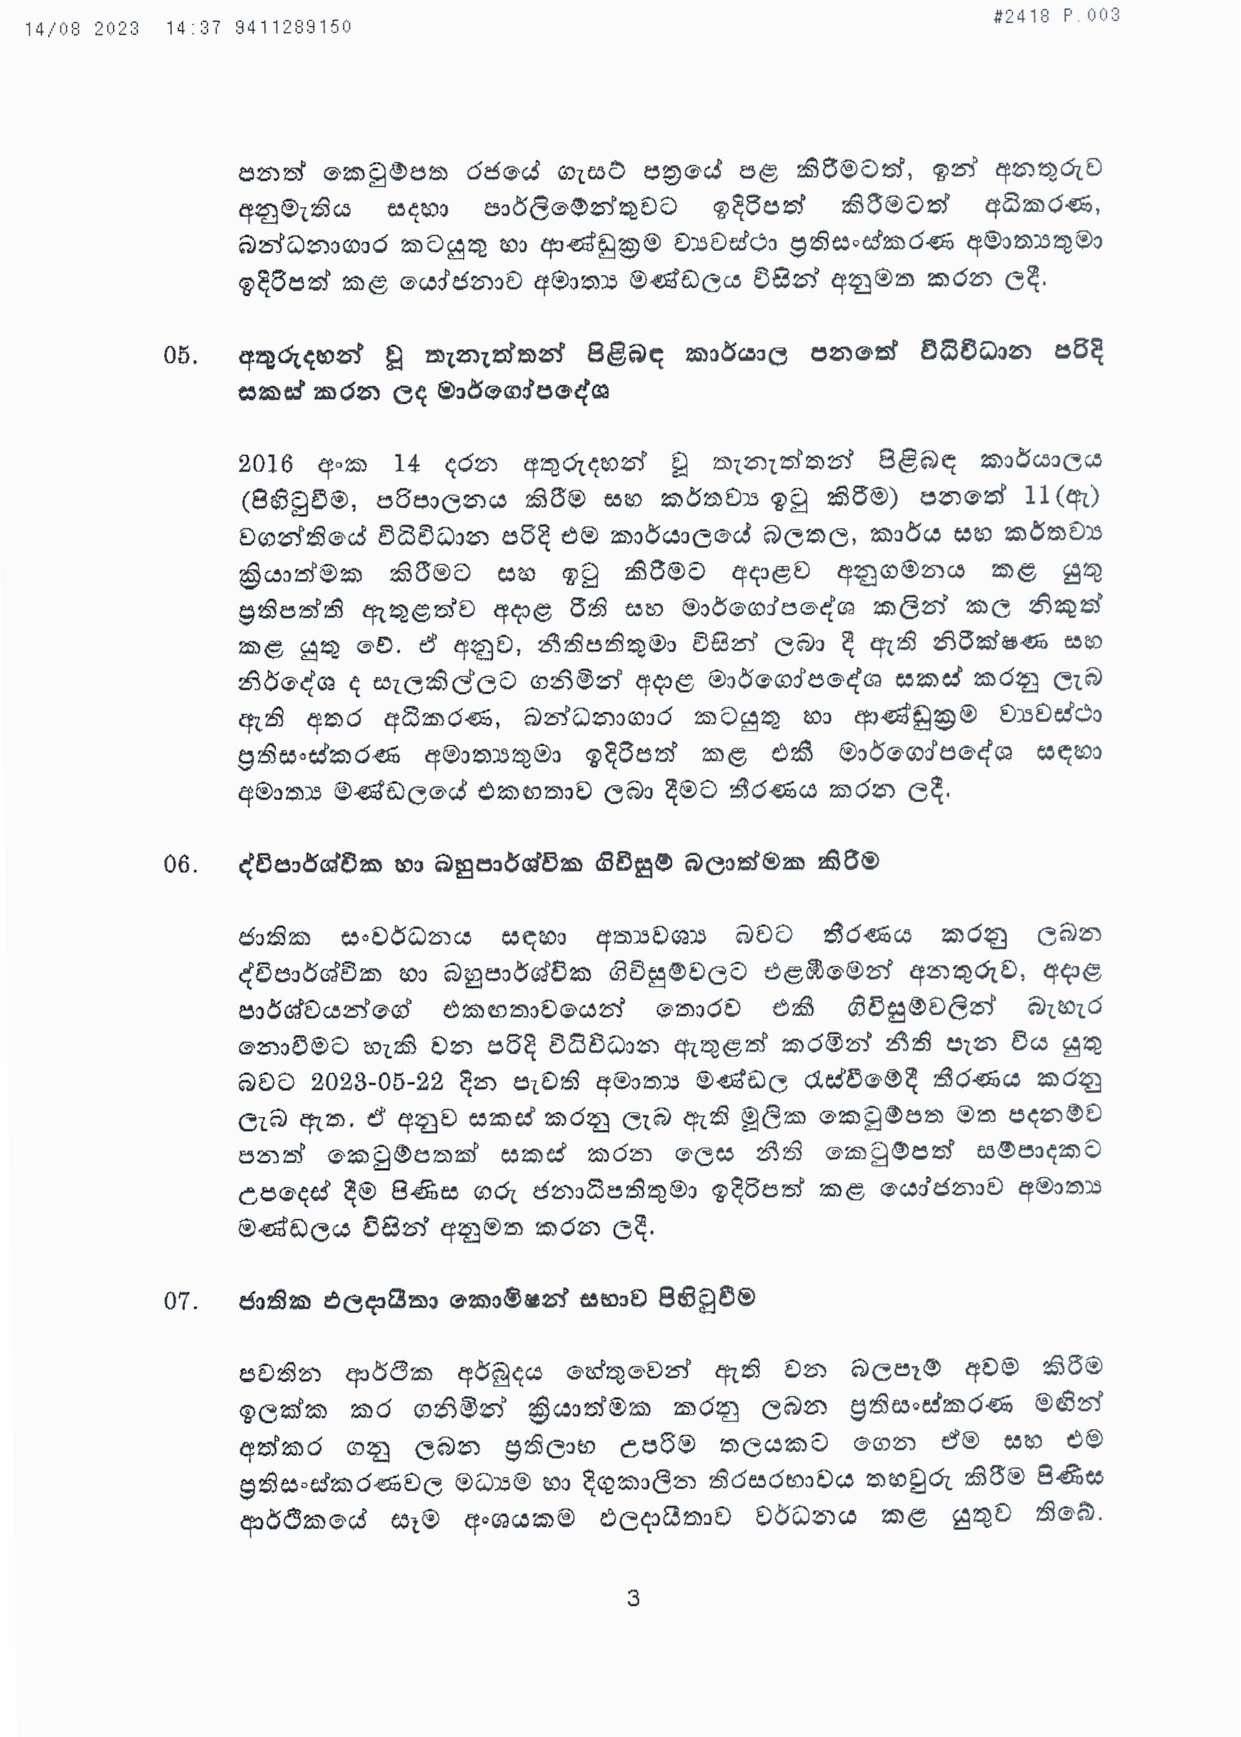 Cabinet Decision on 14.08.2023 1 page 003